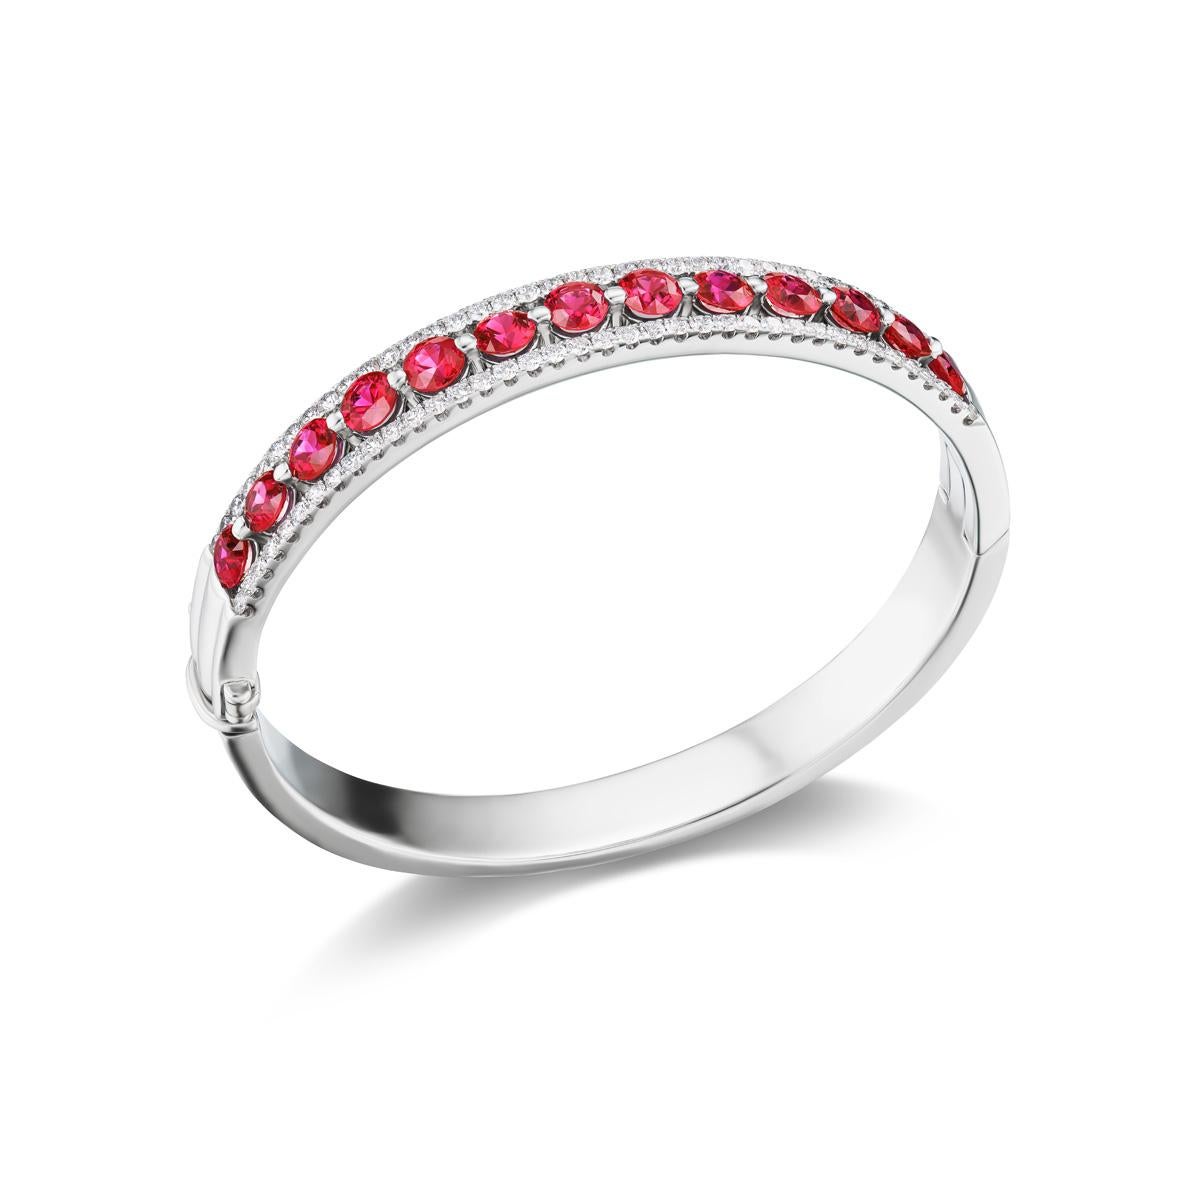 Gorgeous GIA certified Burmese Rubies and diamonds are secured in a classy prong setting which displays a beautiful hue of red throughout this gorgeous piece.